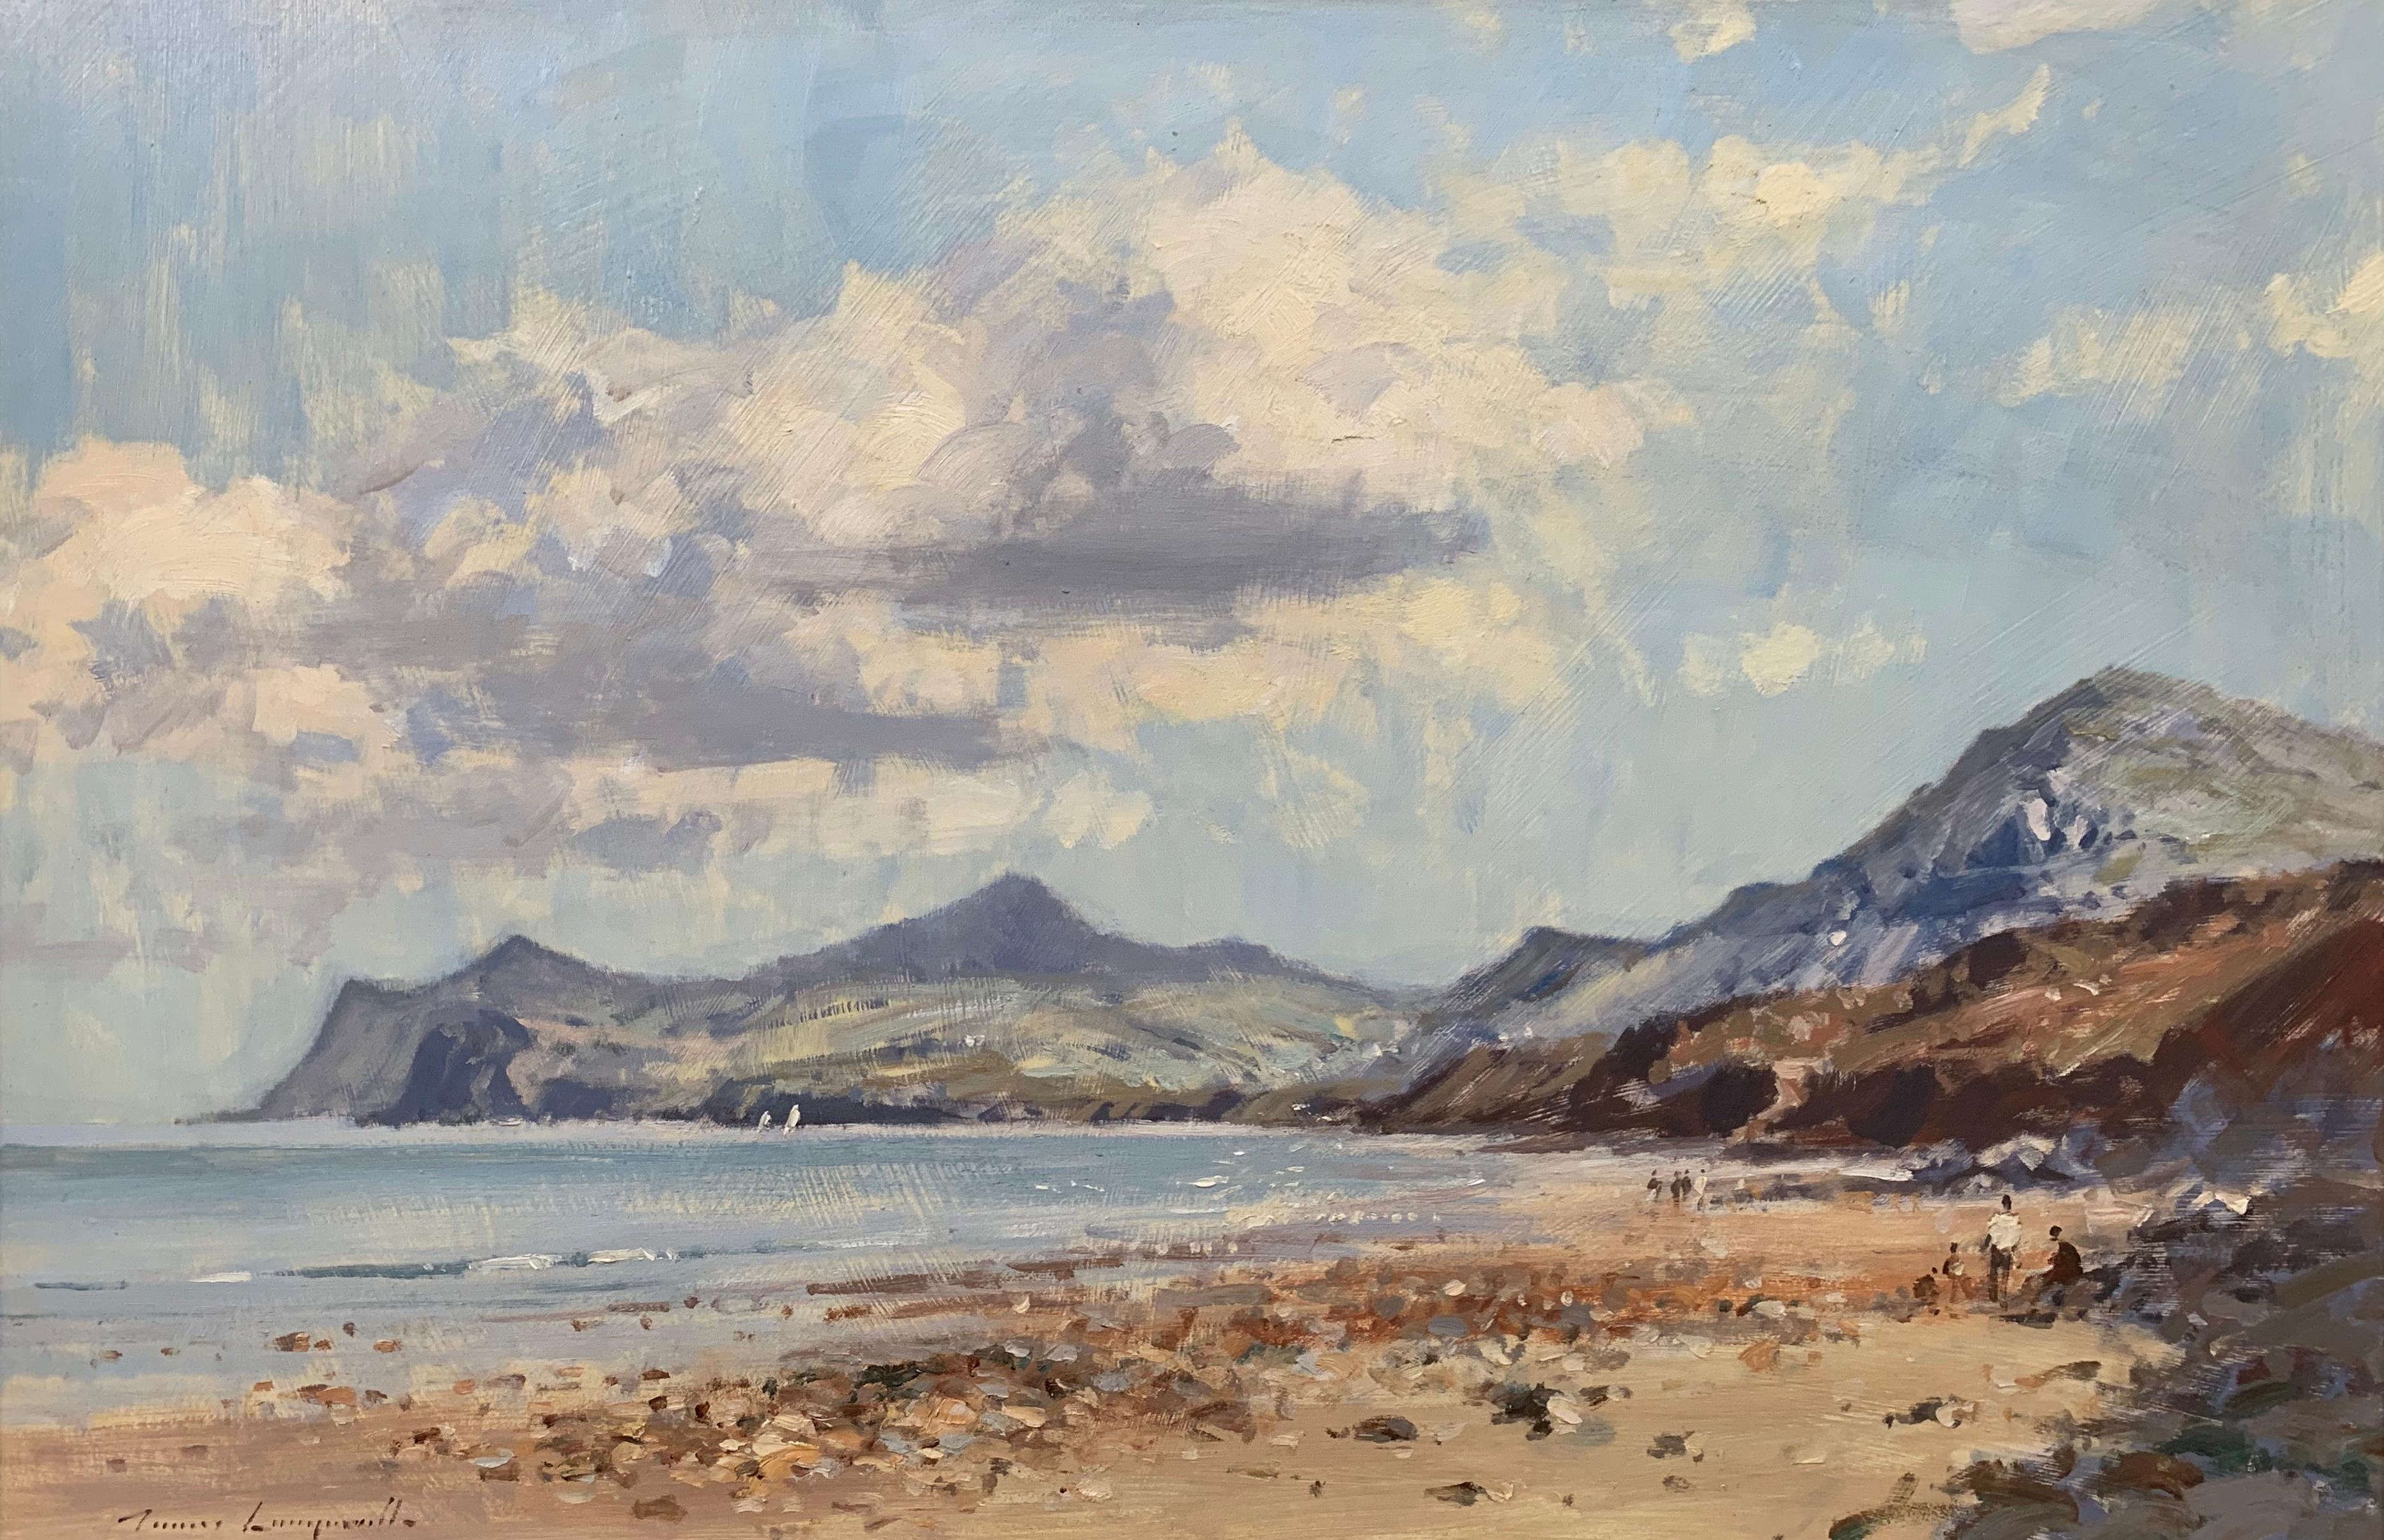 James Longueville PS PBSA (British Northern School)
Landscape Seascape Painting of Coast from Nefyn in North Wales by British Artist
Oil on board, signed bottom left, framed in a high quality gold moulding

Art measures 30 x 20 inches
Frame measures